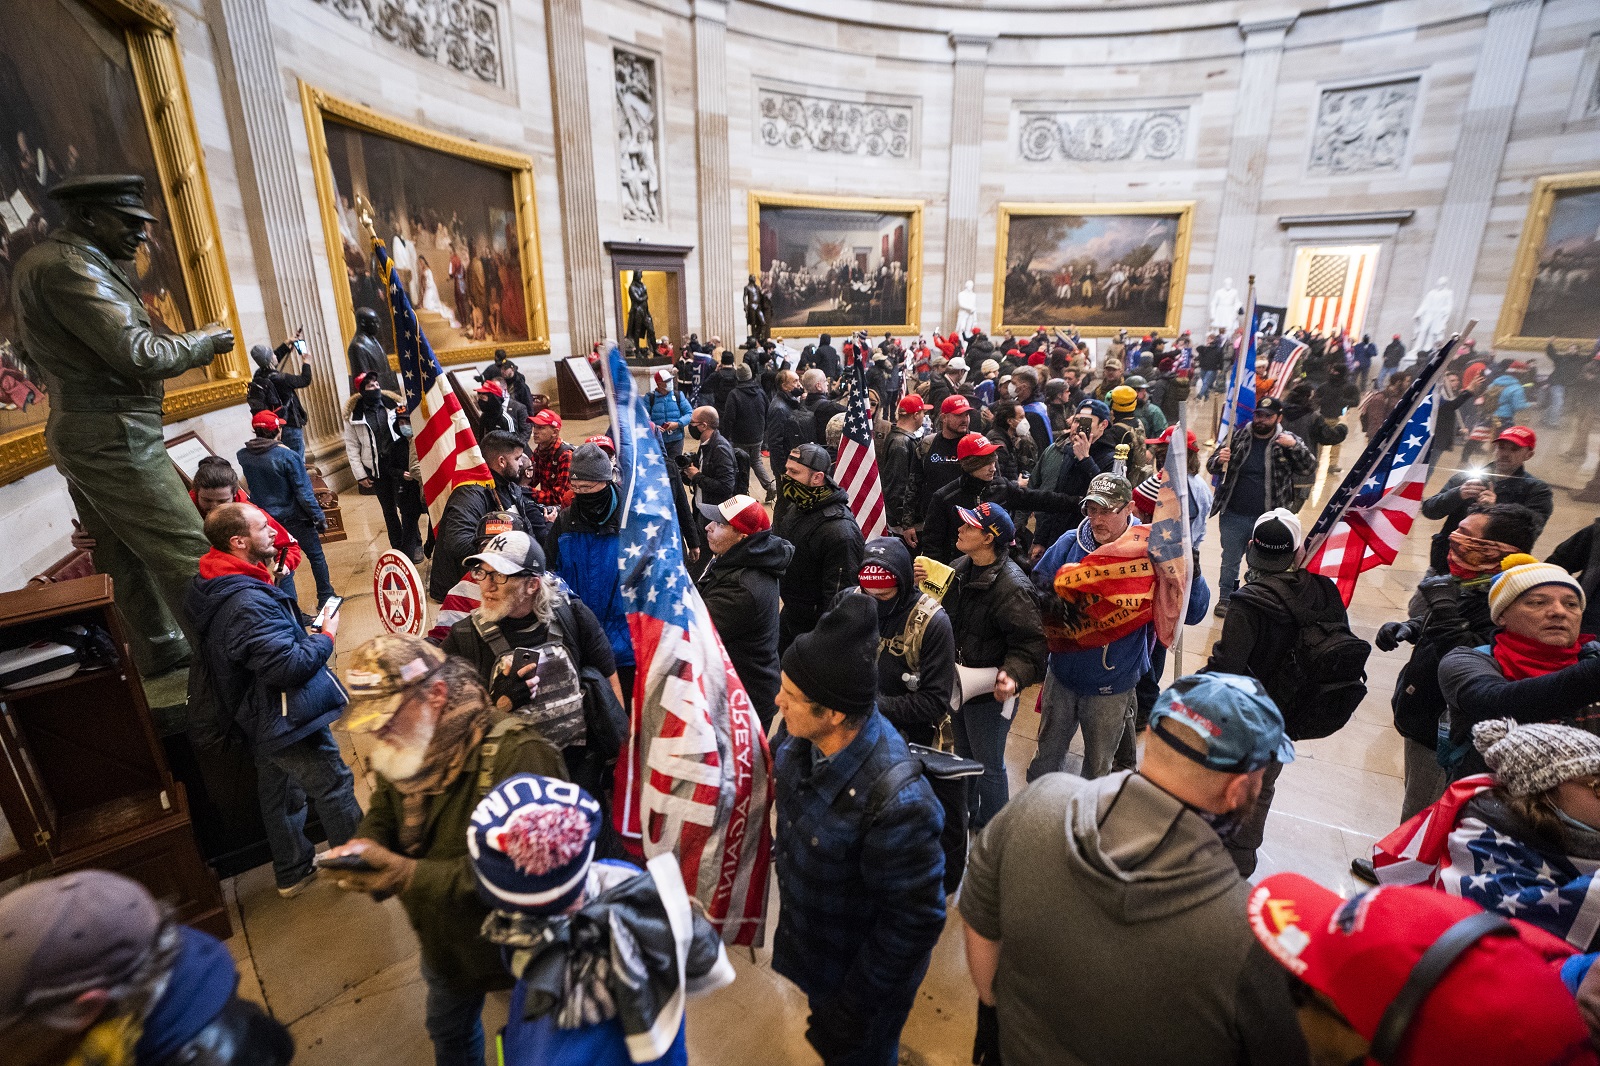 epa08926301 Supporters of US President Donald J. Trump and his baseless claims of voter fraud run through the Rotunda of the US Capitol after breaching Capitol security during their protest against Congress certifying Joe Biden as the next president in Washington, DC, USA, 06 January, 2020 (issued 08 January 2020). On 08 January Assistant House Speaker Katherine Clarke said the House will move to impeach President Trump if the Vice President and Cabinet do not remove him on their own.  EPA/JIM LO SCALZO